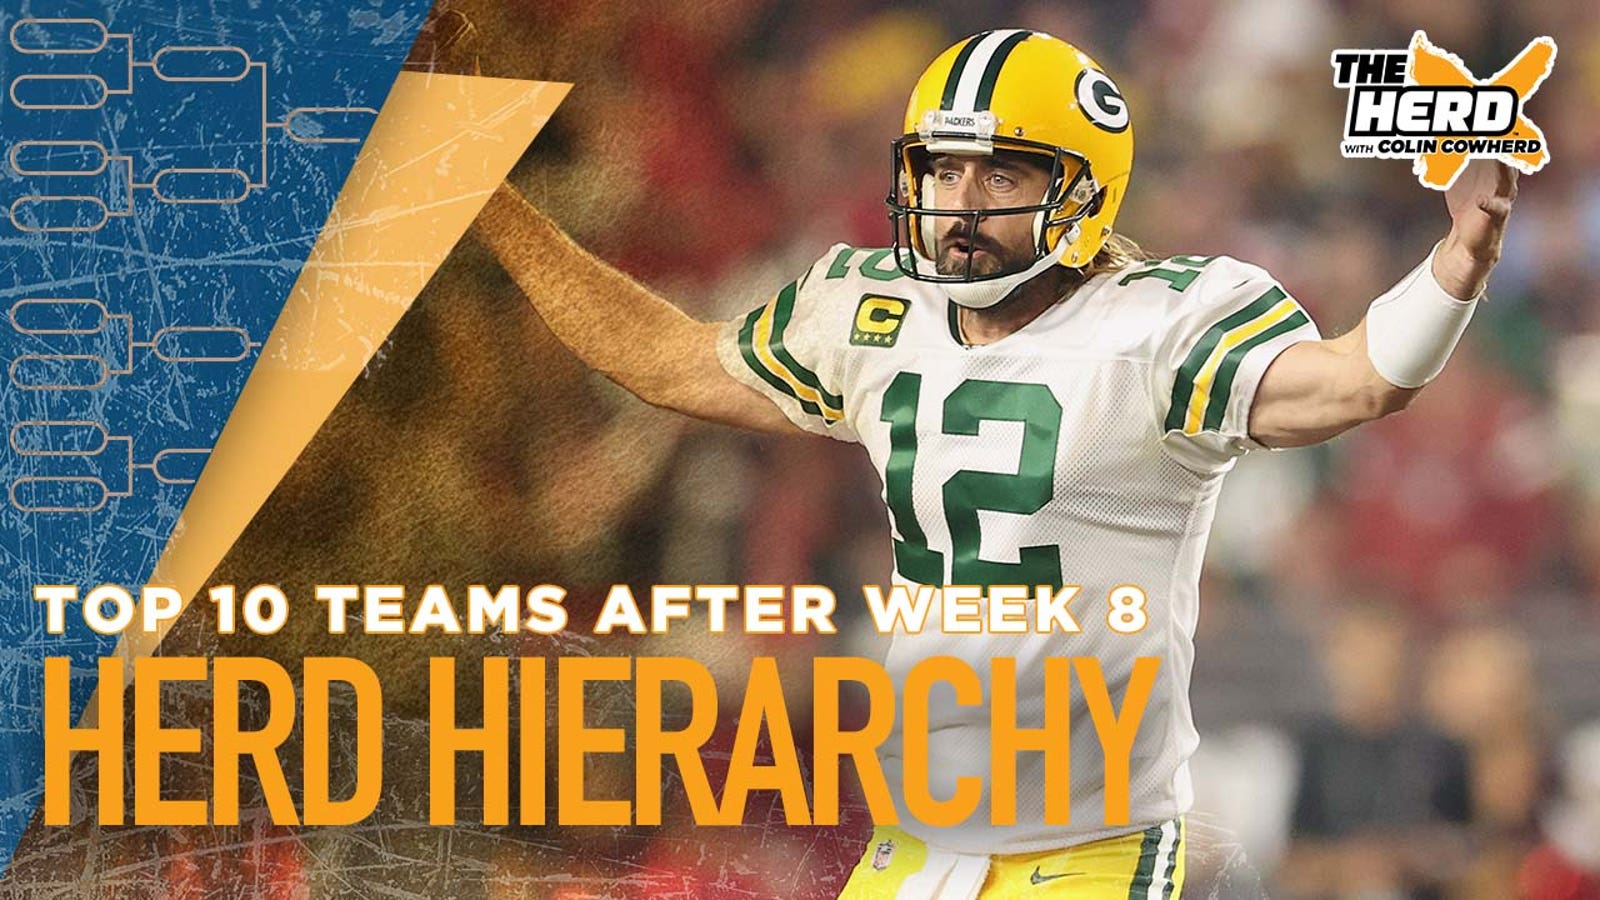 Herd Hierarchy: Colin ranks the top 10 teams in the NFL after Week 8